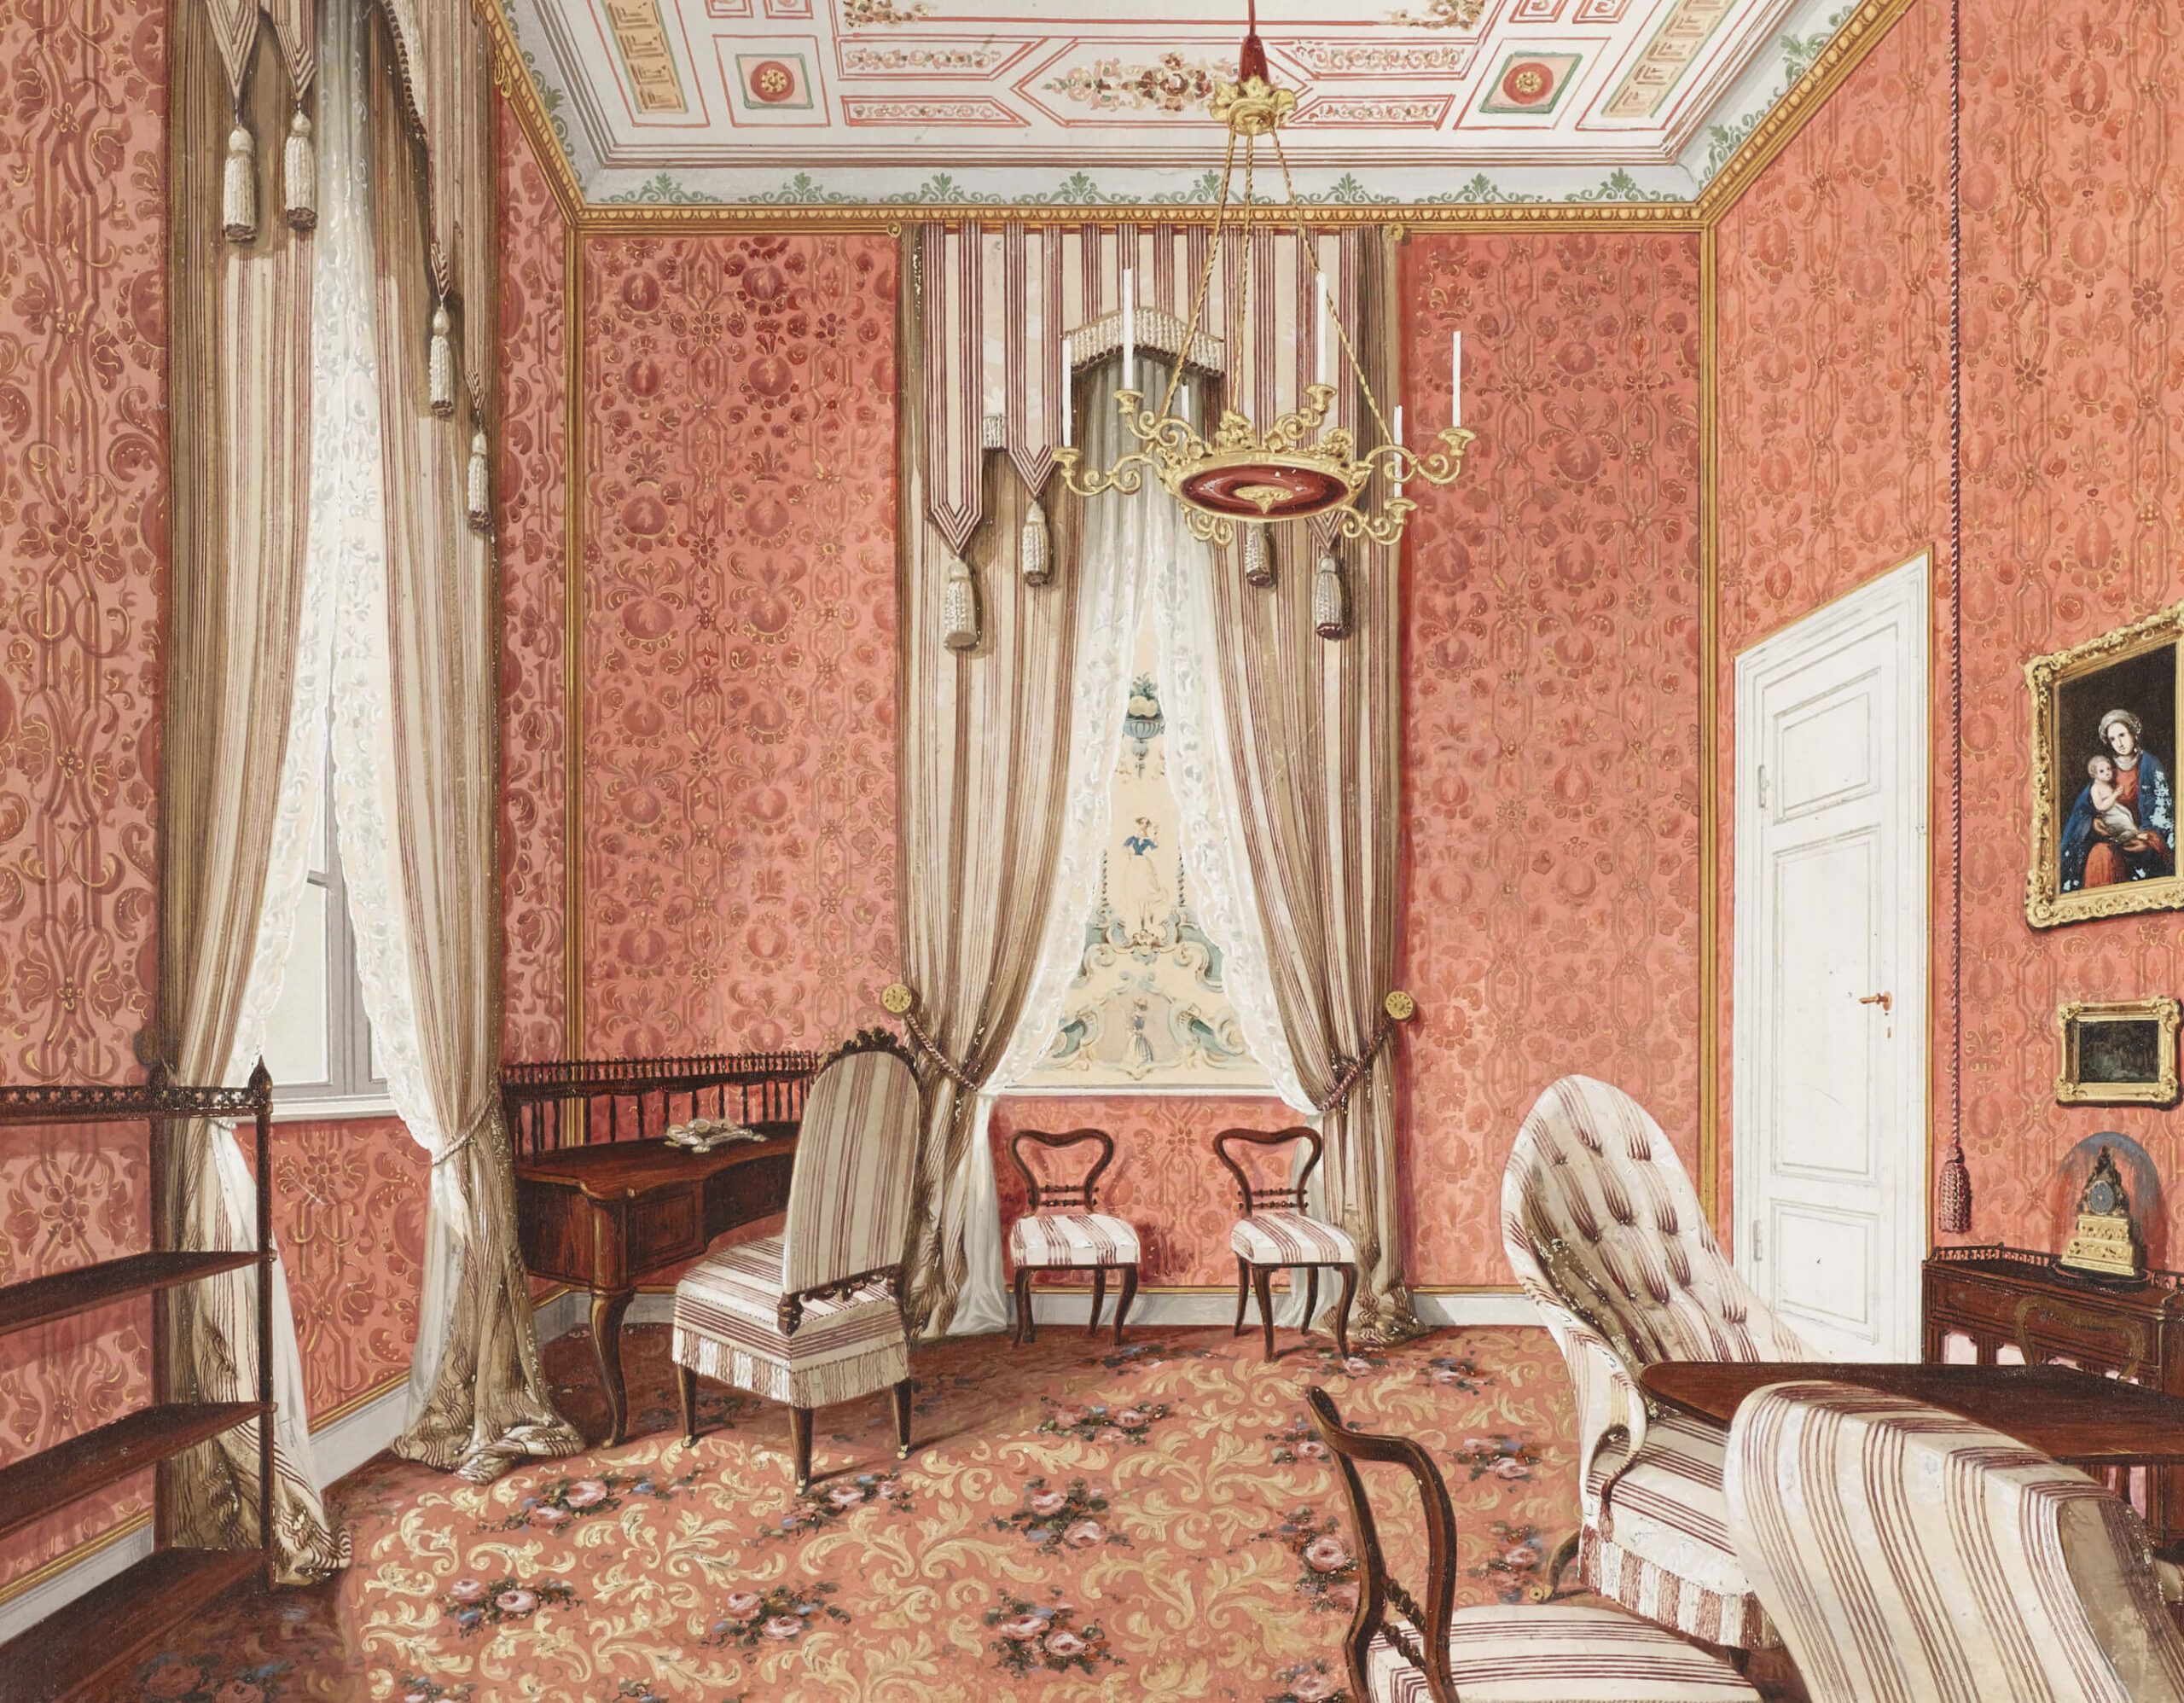 Captivating Curtain Styles of the 19th Century: A Window into the Past